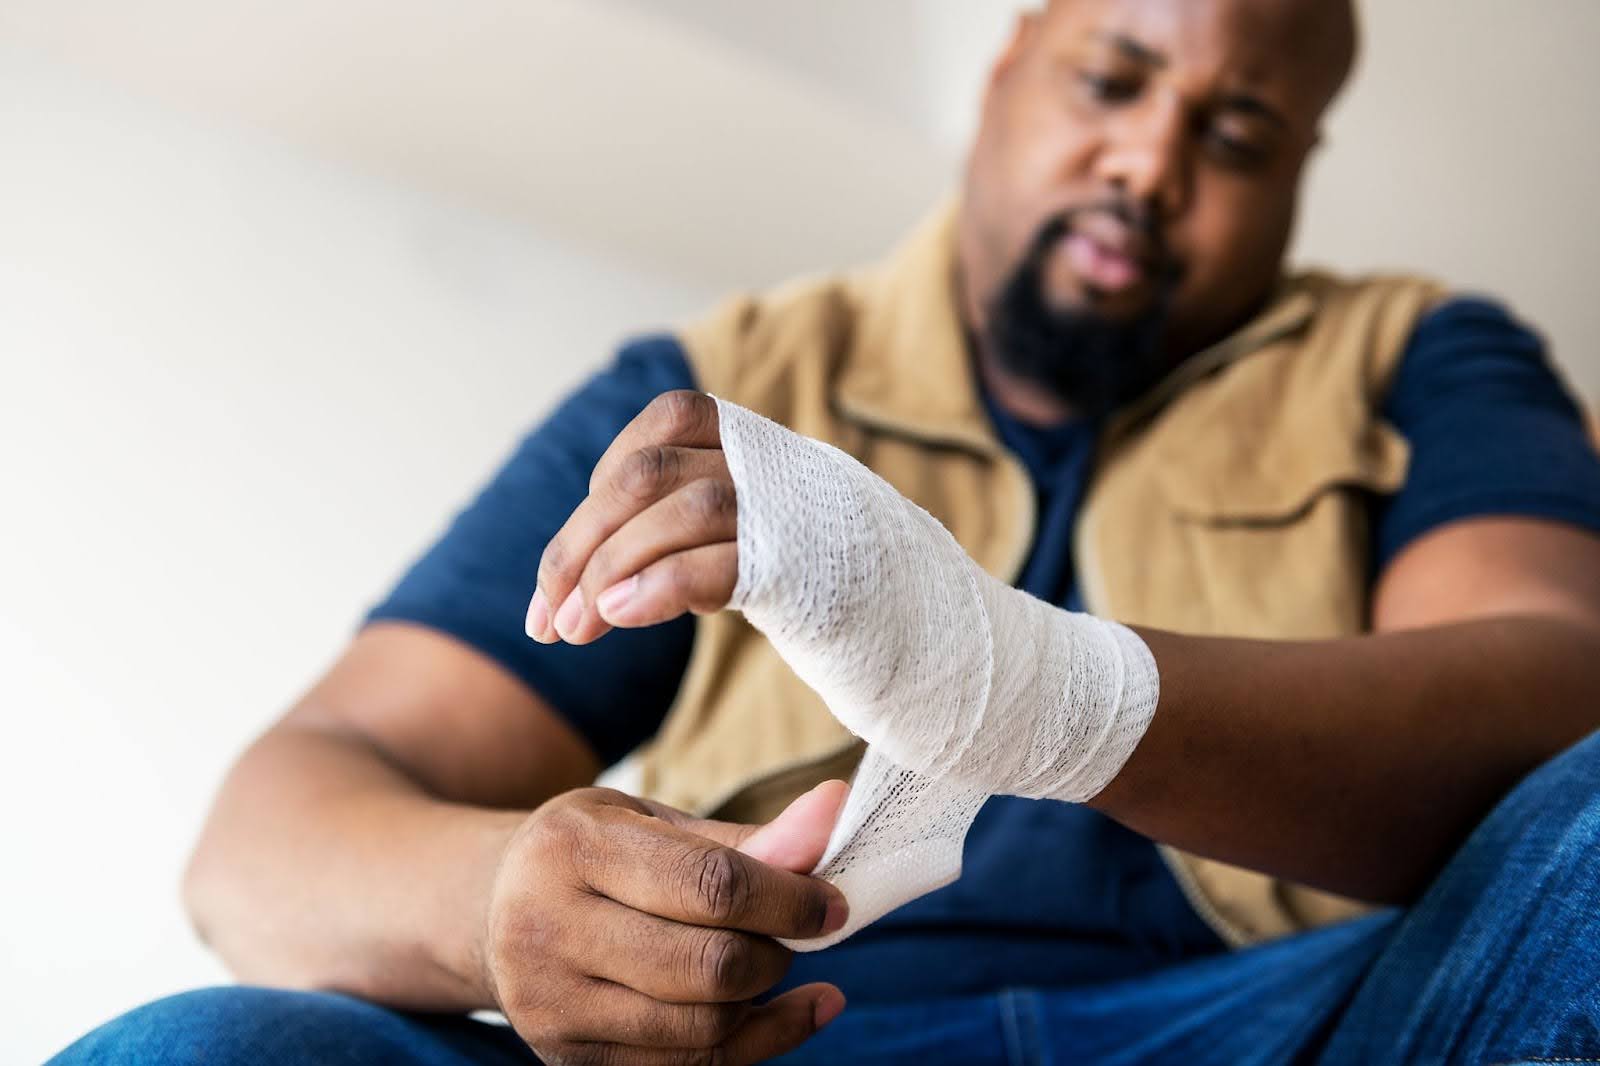 Employee with a work related wrist injury